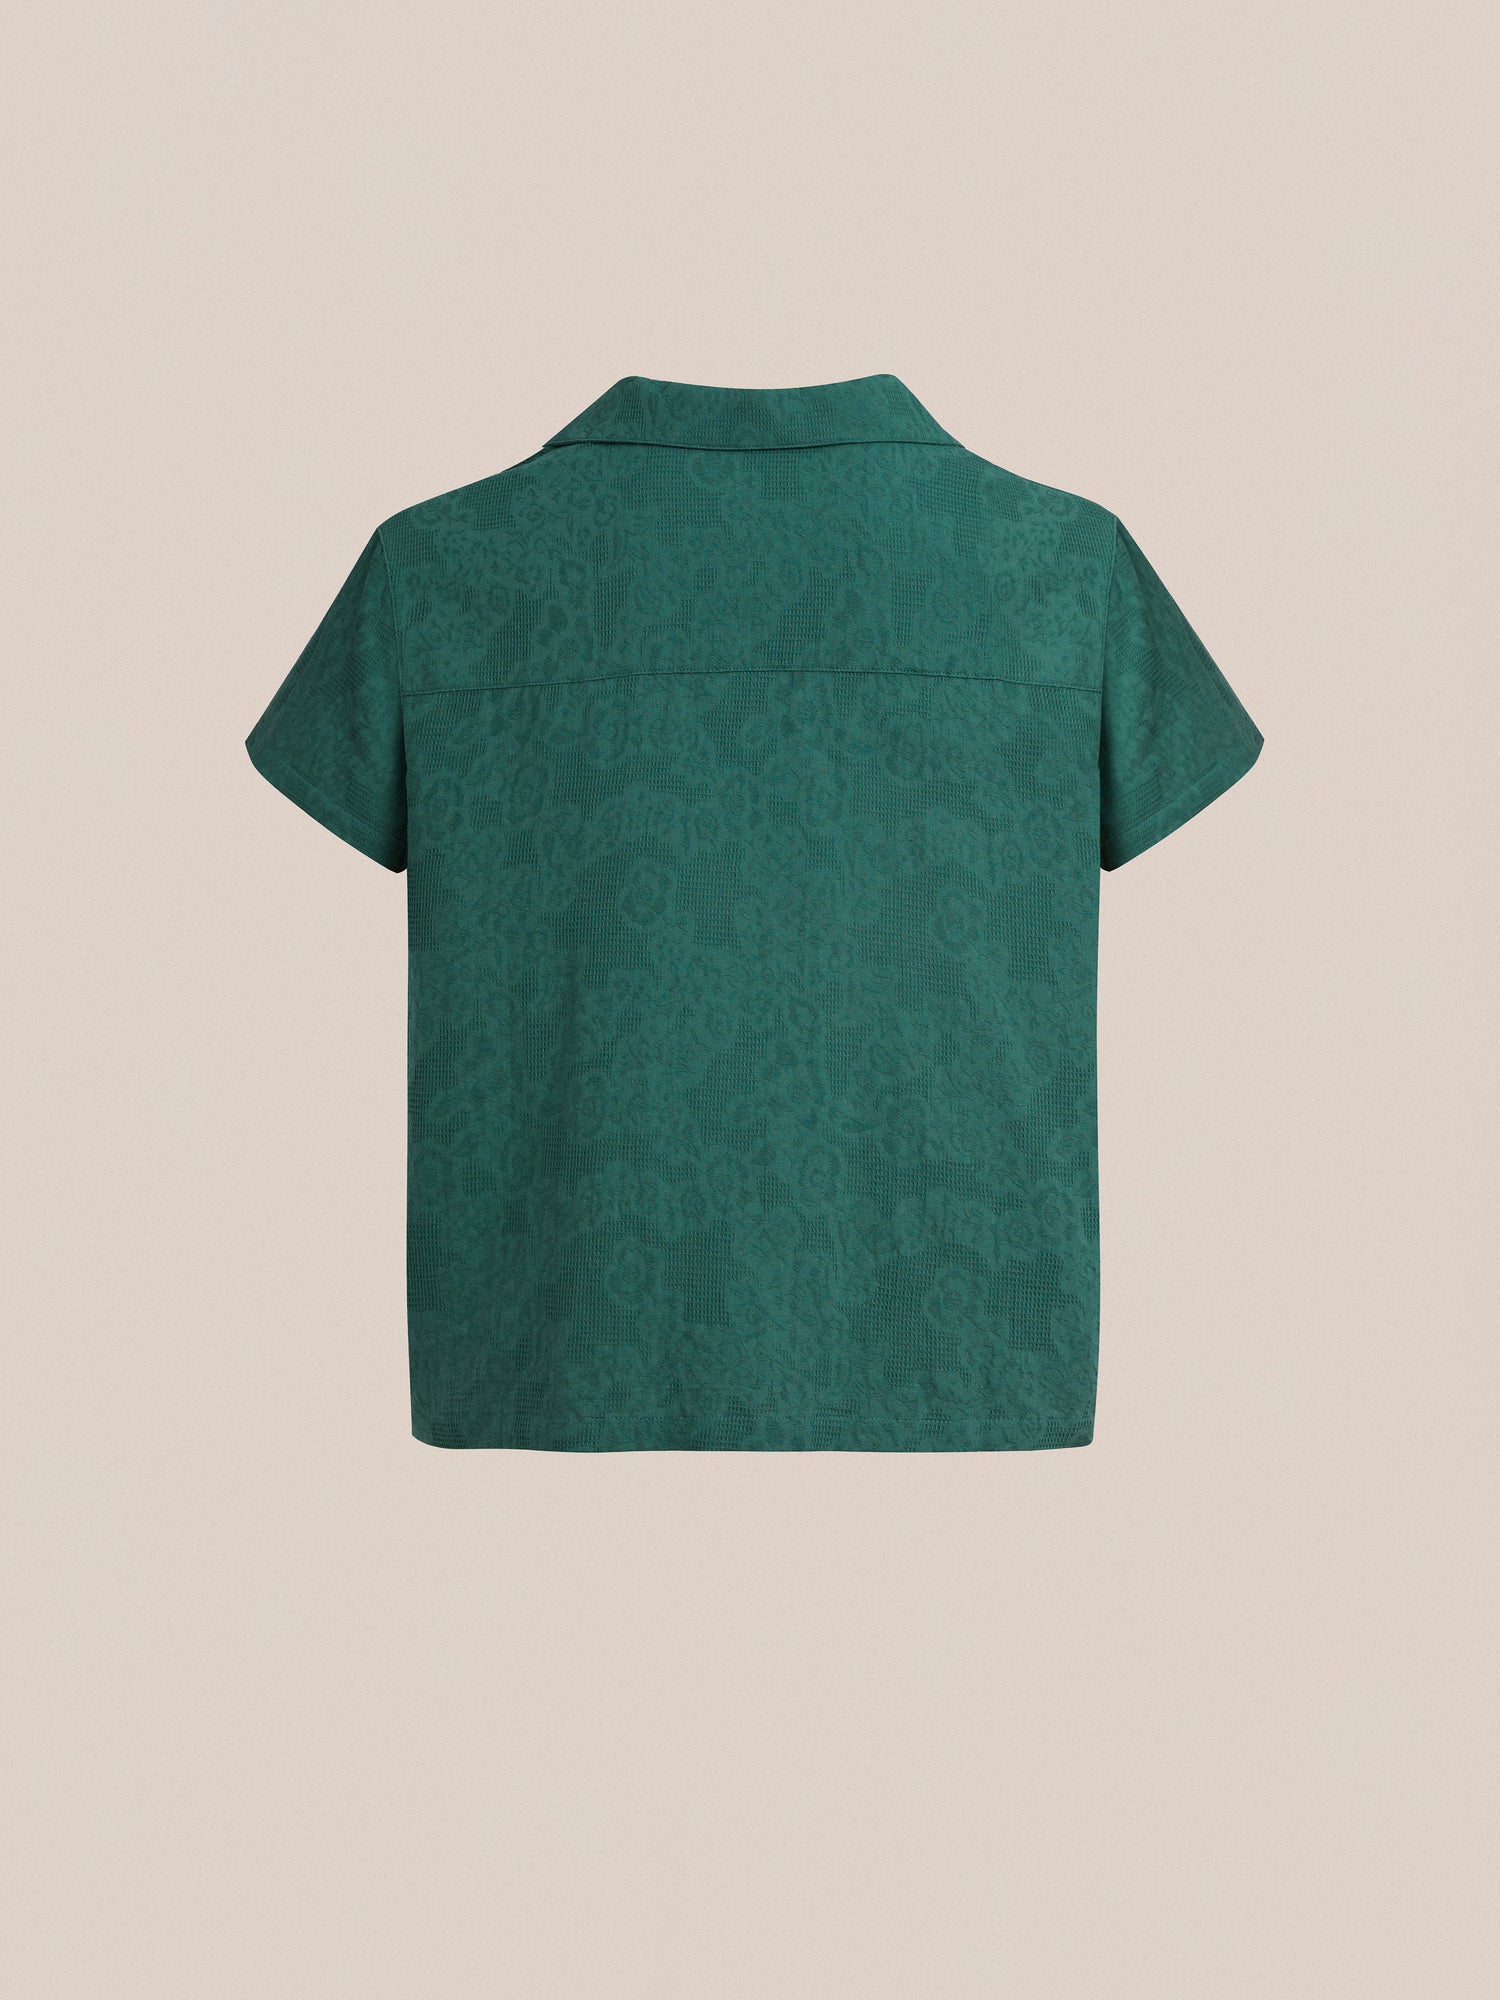 The back view of a green Found Mount Camp Shirt with a short sleeve and lace detailing.